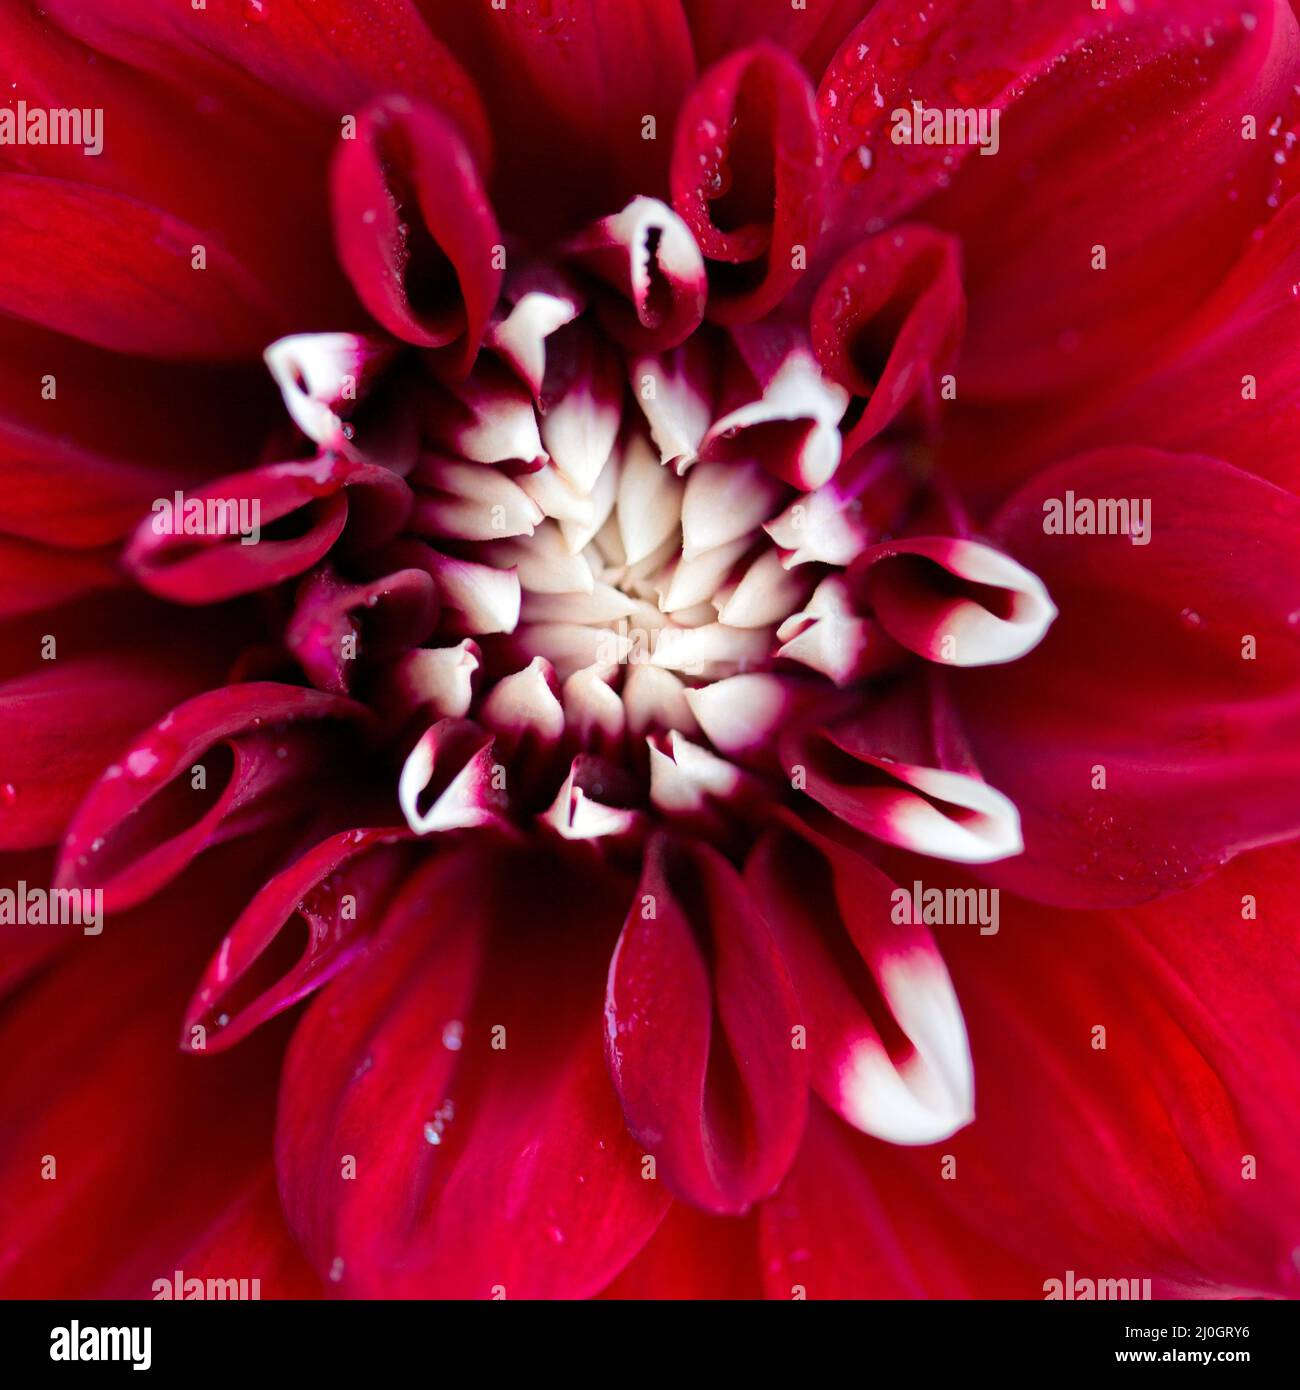 Macro photo of a red dahlia flower background. Stock Photo